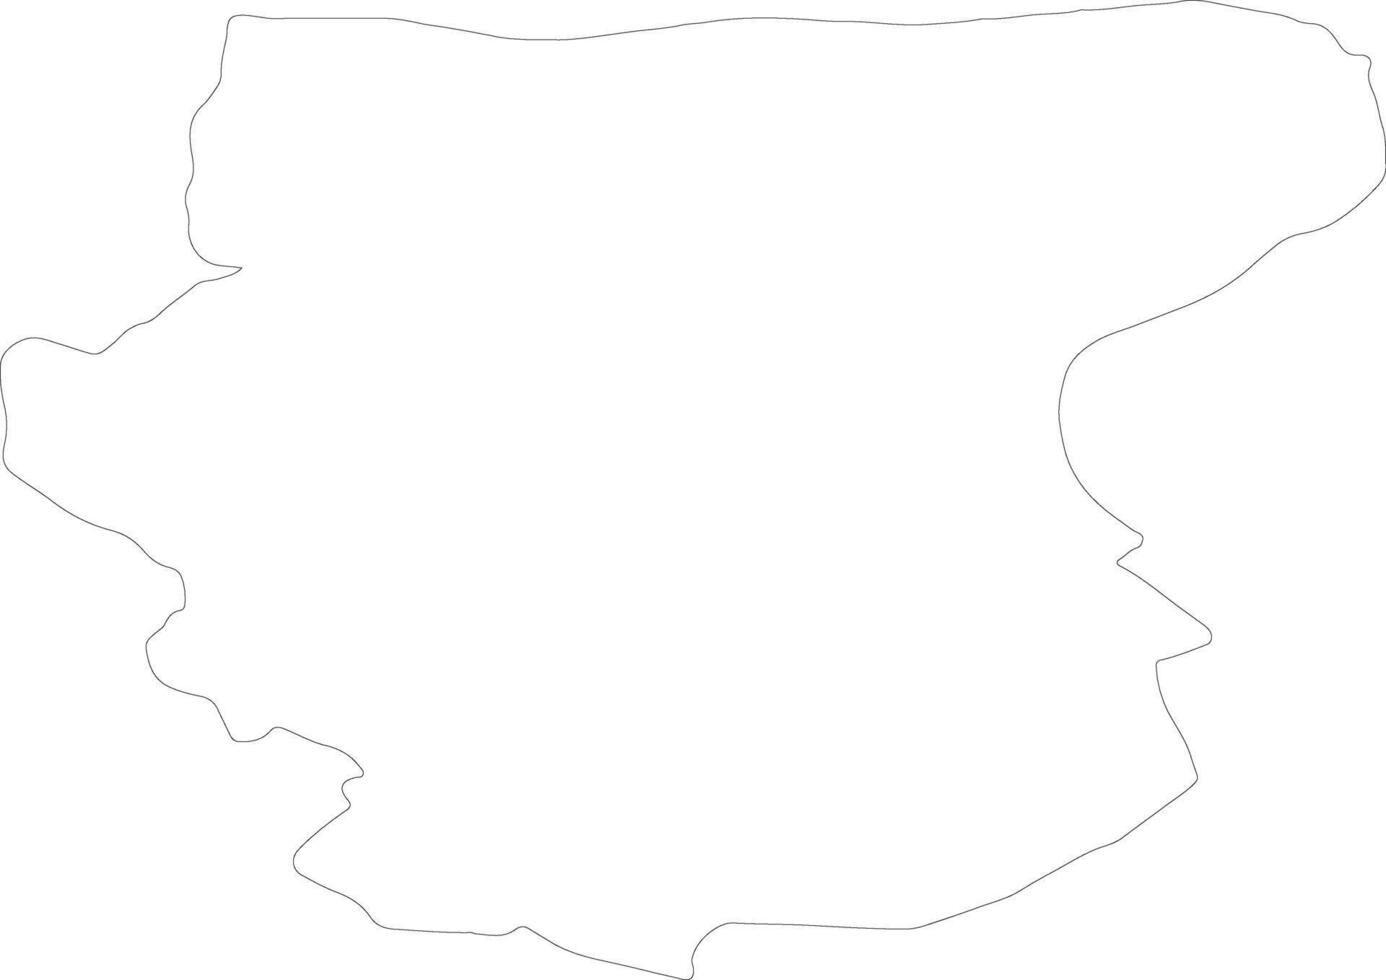 Foggia Italy outline map vector